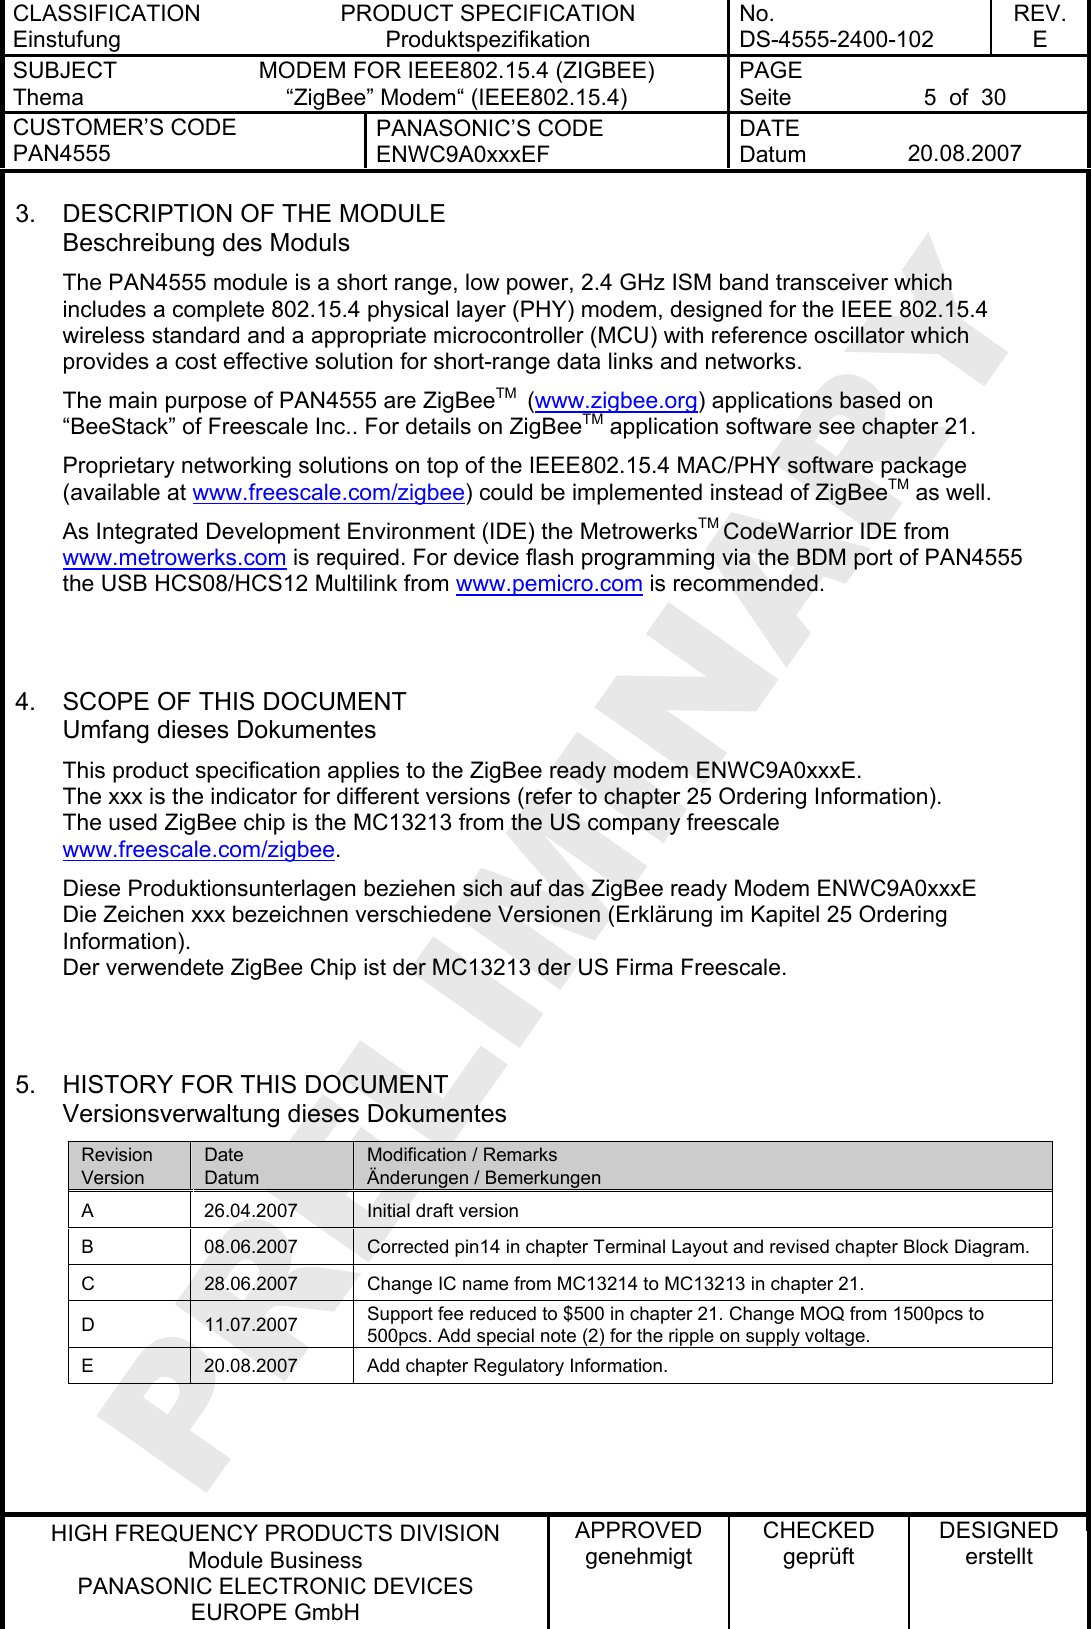 CLASSIFICATION Einstufung PRODUCT SPECIFICATION Produktspezifikation No. DS-4555-2400-102 REV. E SUBJECT Thema MODEM FOR IEEE802.15.4 (ZIGBEE) “ZigBee” Modem“ (IEEE802.15.4) PAGE Seite  5  of  30 CUSTOMER’S CODE PAN4555 PANASONIC’S CODE ENWC9A0xxxEF DATE Datum  20.08.2007   HIGH FREQUENCY PRODUCTS DIVISION Module Business PANASONIC ELECTRONIC DEVICES  EUROPE GmbH APPROVED genehmigt CHECKED geprüft DESIGNED erstellt 3.  DESCRIPTION OF THE MODULE Beschreibung des Moduls The PAN4555 module is a short range, low power, 2.4 GHz ISM band transceiver which includes a complete 802.15.4 physical layer (PHY) modem, designed for the IEEE 802.15.4 wireless standard and a appropriate microcontroller (MCU) with reference oscillator which provides a cost effective solution for short-range data links and networks. The main purpose of PAN4555 are ZigBeeTM  (www.zigbee.org) applications based on “BeeStack” of Freescale Inc.. For details on ZigBee  application software see chapter 21. TMProprietary networking solutions on top of the IEEE802.15.4 MAC/PHY software package (available at www.freescale.com/zigbee) could be implemented instead of ZigBee  as well. TMAs Integrated Development Environment (IDE) the MetrowerksTM CodeWarrior IDE from www.metrowerks.com is required. For device flash programming via the BDM port of PAN4555 the USB HCS08/HCS12 Multilink from www.pemicro.com is recommended.   4.  SCOPE OF THIS DOCUMENT Umfang dieses Dokumentes This product specification applies to the ZigBee ready modem ENWC9A0xxxE. The xxx is the indicator for different versions (refer to chapter 25 Ordering Information). The used ZigBee chip is the MC13213 from the US company freescale www.freescale.com/zigbee. Diese Produktionsunterlagen beziehen sich auf das ZigBee ready Modem ENWC9A0xxxE Die Zeichen xxx bezeichnen verschiedene Versionen (Erklärung im Kapitel 25 Ordering Information). Der verwendete ZigBee Chip ist der MC13213 der US Firma Freescale.   5.  HISTORY FOR THIS DOCUMENT Versionsverwaltung dieses Dokumentes Revision Version Date Datum Modification / Remarks Änderungen / Bemerkungen A  26.04.2007  Initial draft version B  08.06.2007  Corrected pin14 in chapter Terminal Layout and revised chapter Block Diagram. C  28.06.2007  Change IC name from MC13214 to MC13213 in chapter 21. D 11.07.2007 Support fee reduced to $500 in chapter 21. Change MOQ from 1500pcs to 500pcs. Add special note (2) for the ripple on supply voltage. E  20.08.2007  Add chapter Regulatory Information.    